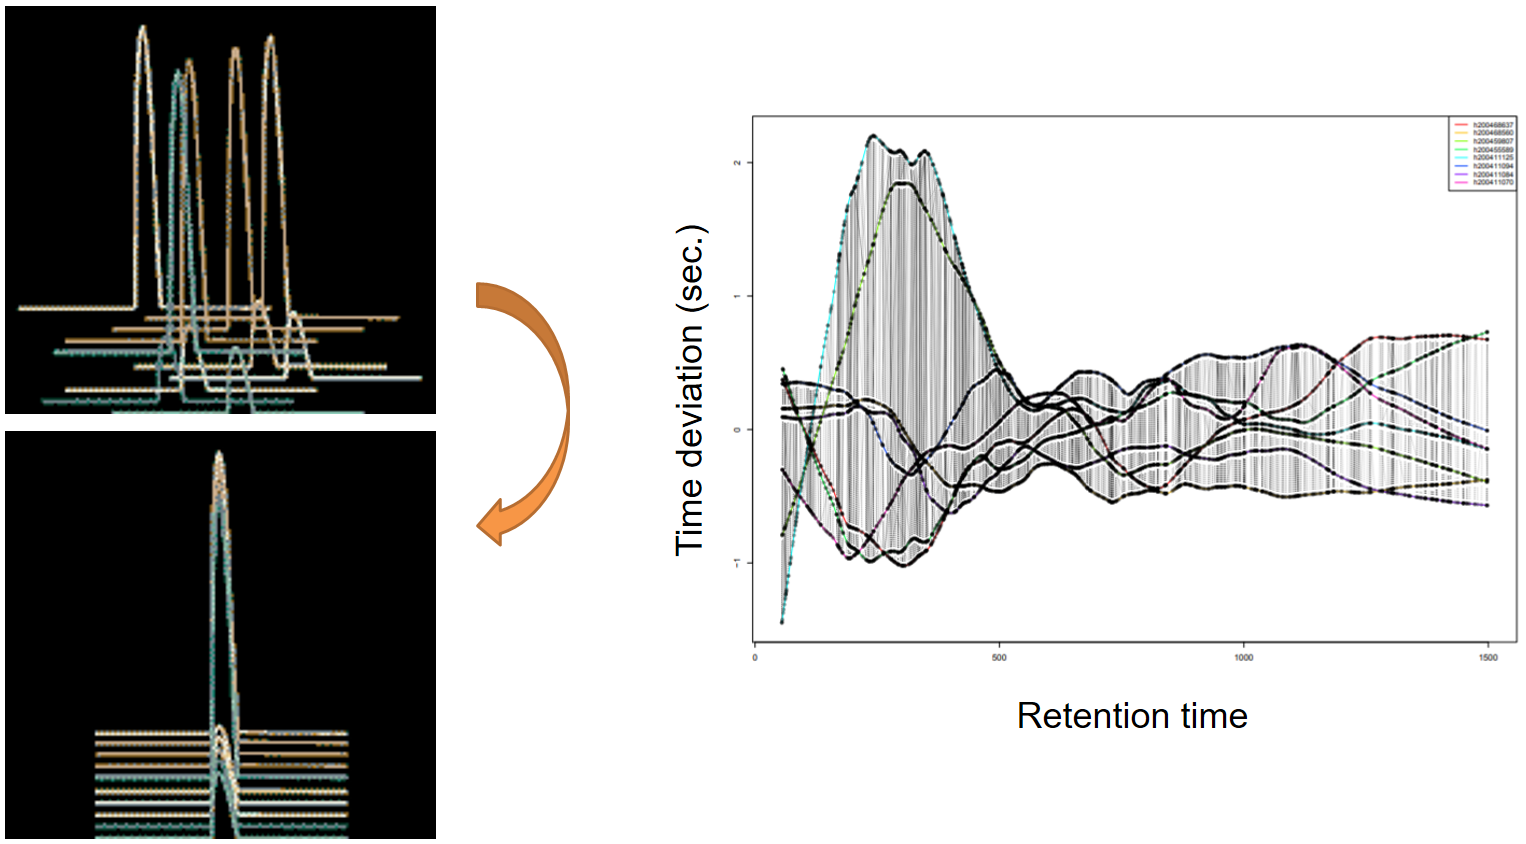 On the left there is a "before/after" plot showing several examples of a gausian peak, first all shifted, but then all aligned. On the right is an example of the graphical output from adjustRtime, representing samples as lines with retention time in abscissa and time deviation on ordinate.